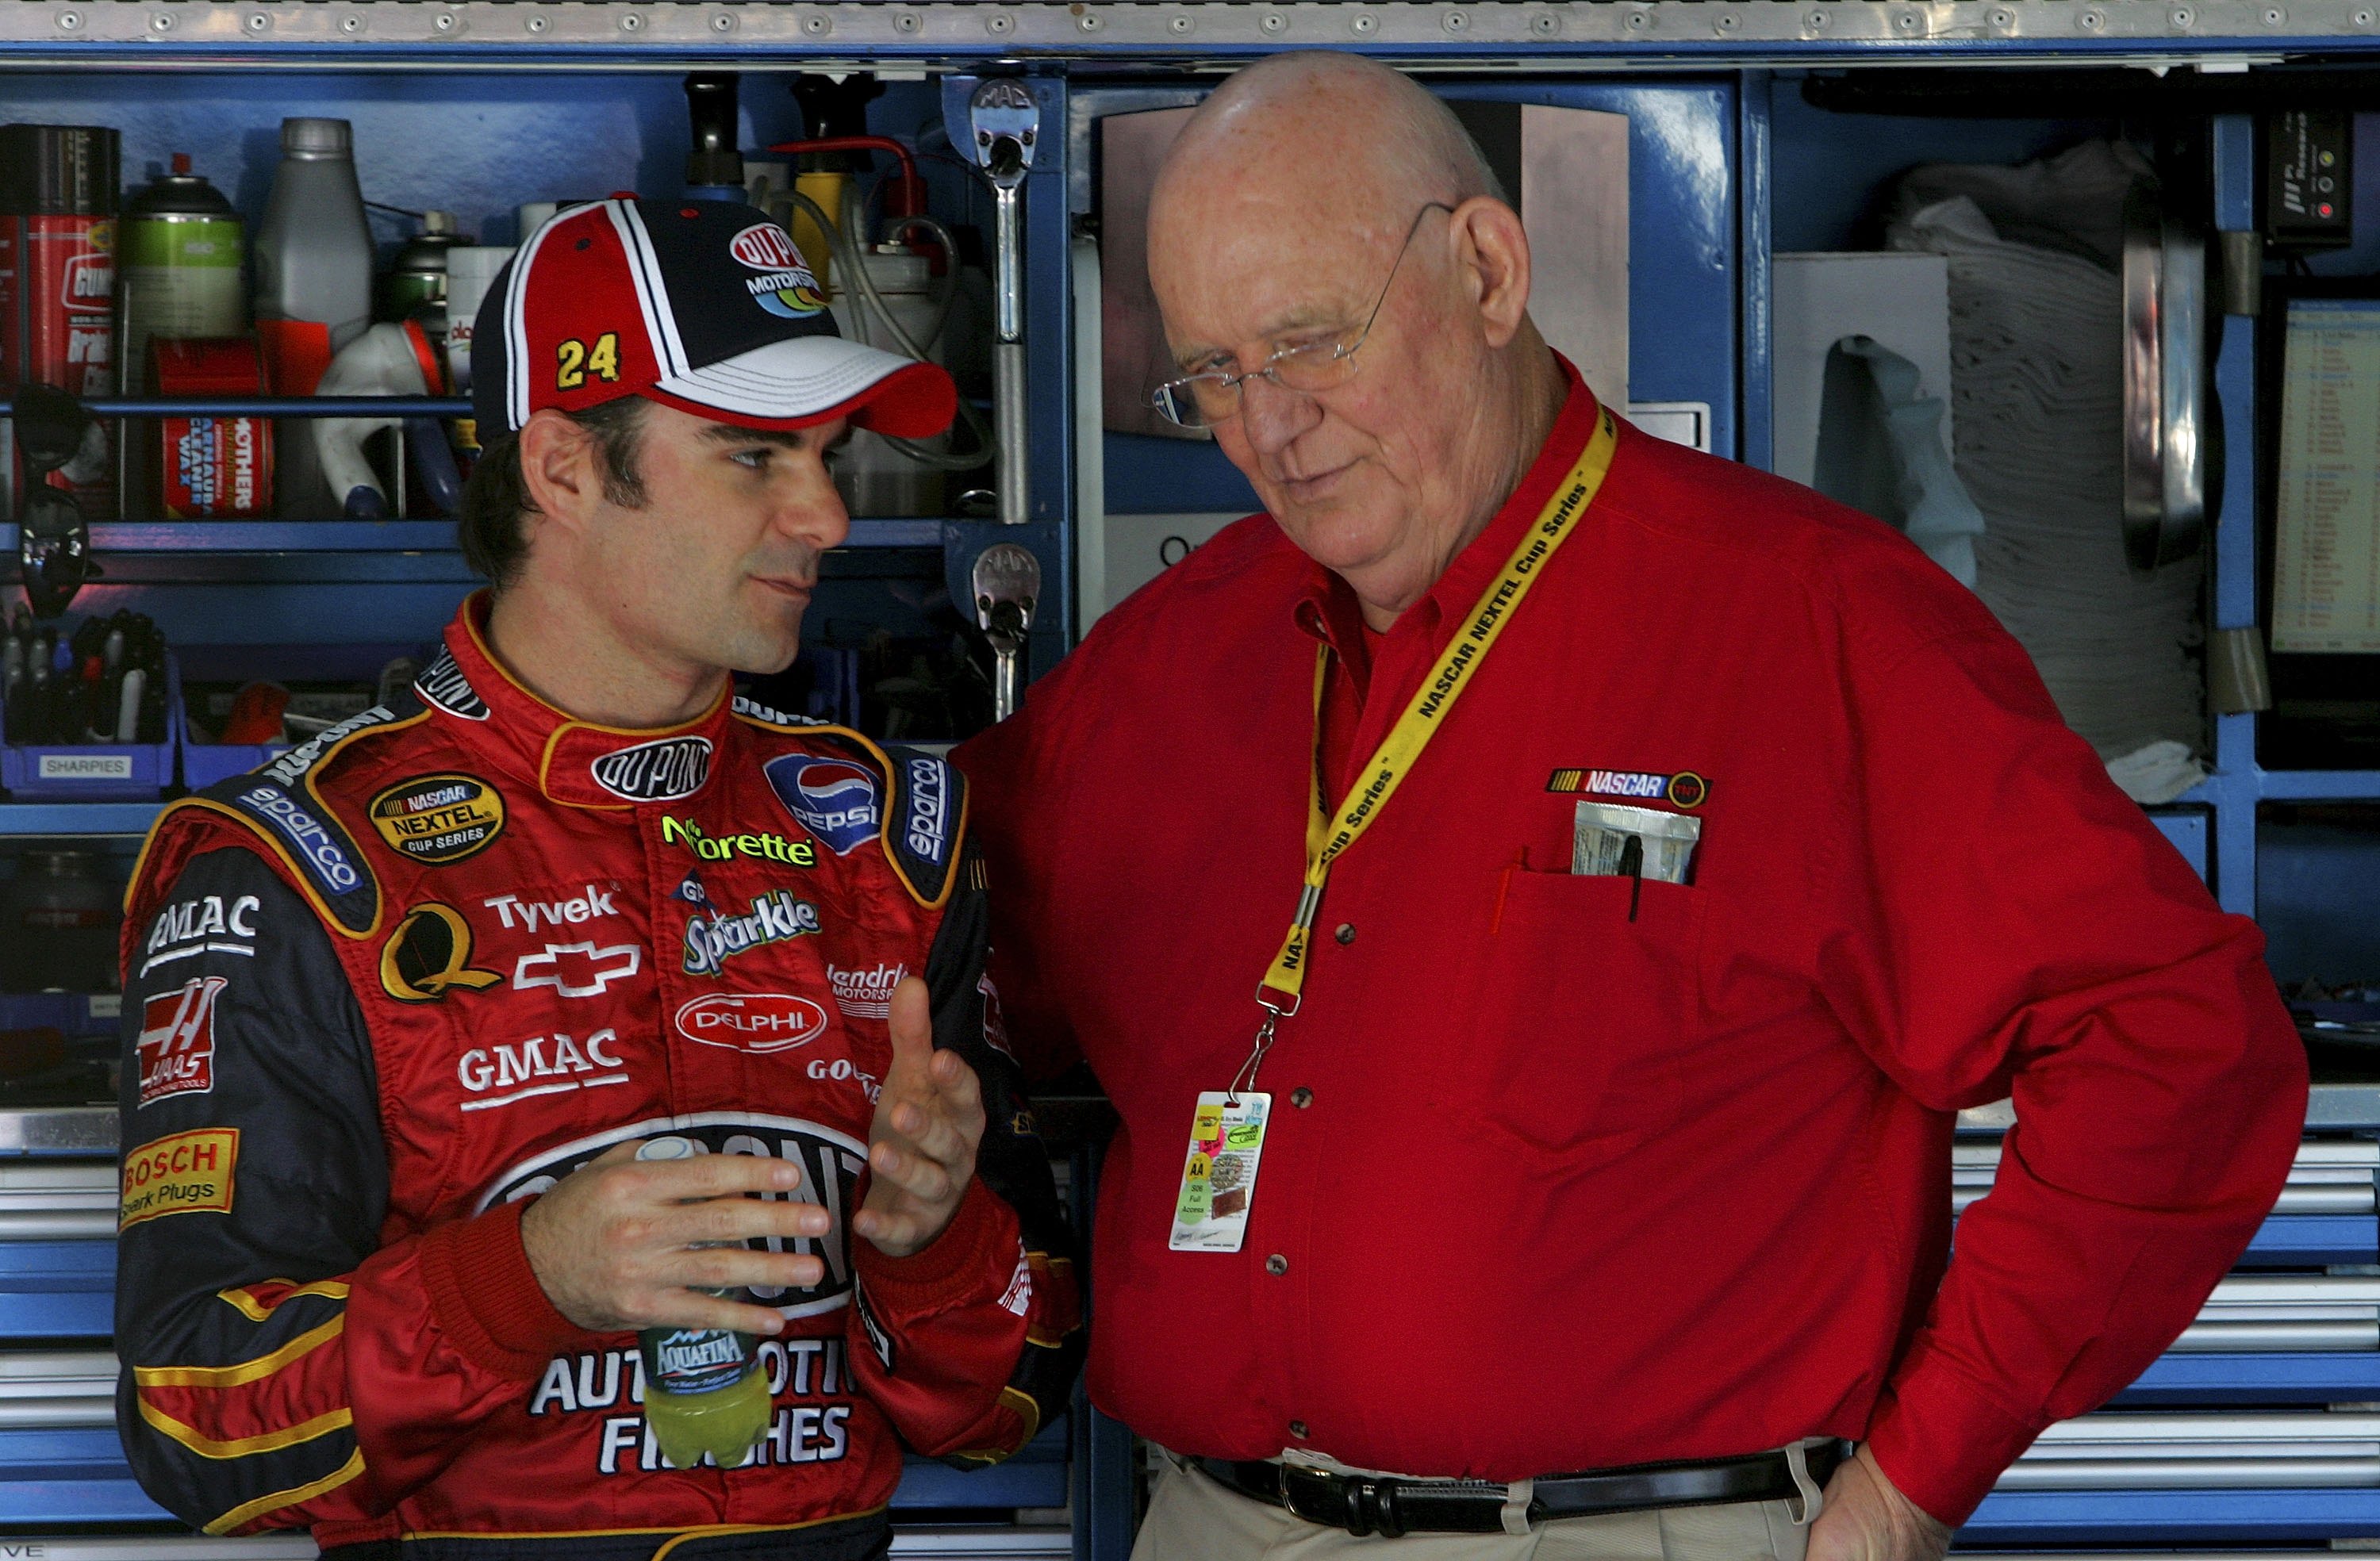 CONCORD, NC - OCTOBER 13:  Jeff Gordon, driver of the #24 DuPont Chevrolet, talks with TV Analyst Benny Parsons, in the garage, during practice for the NASCAR Nextel Cup Series Bank of America 500 on October 13, 2006 at Lowe's Motor Speedway in Concord, N